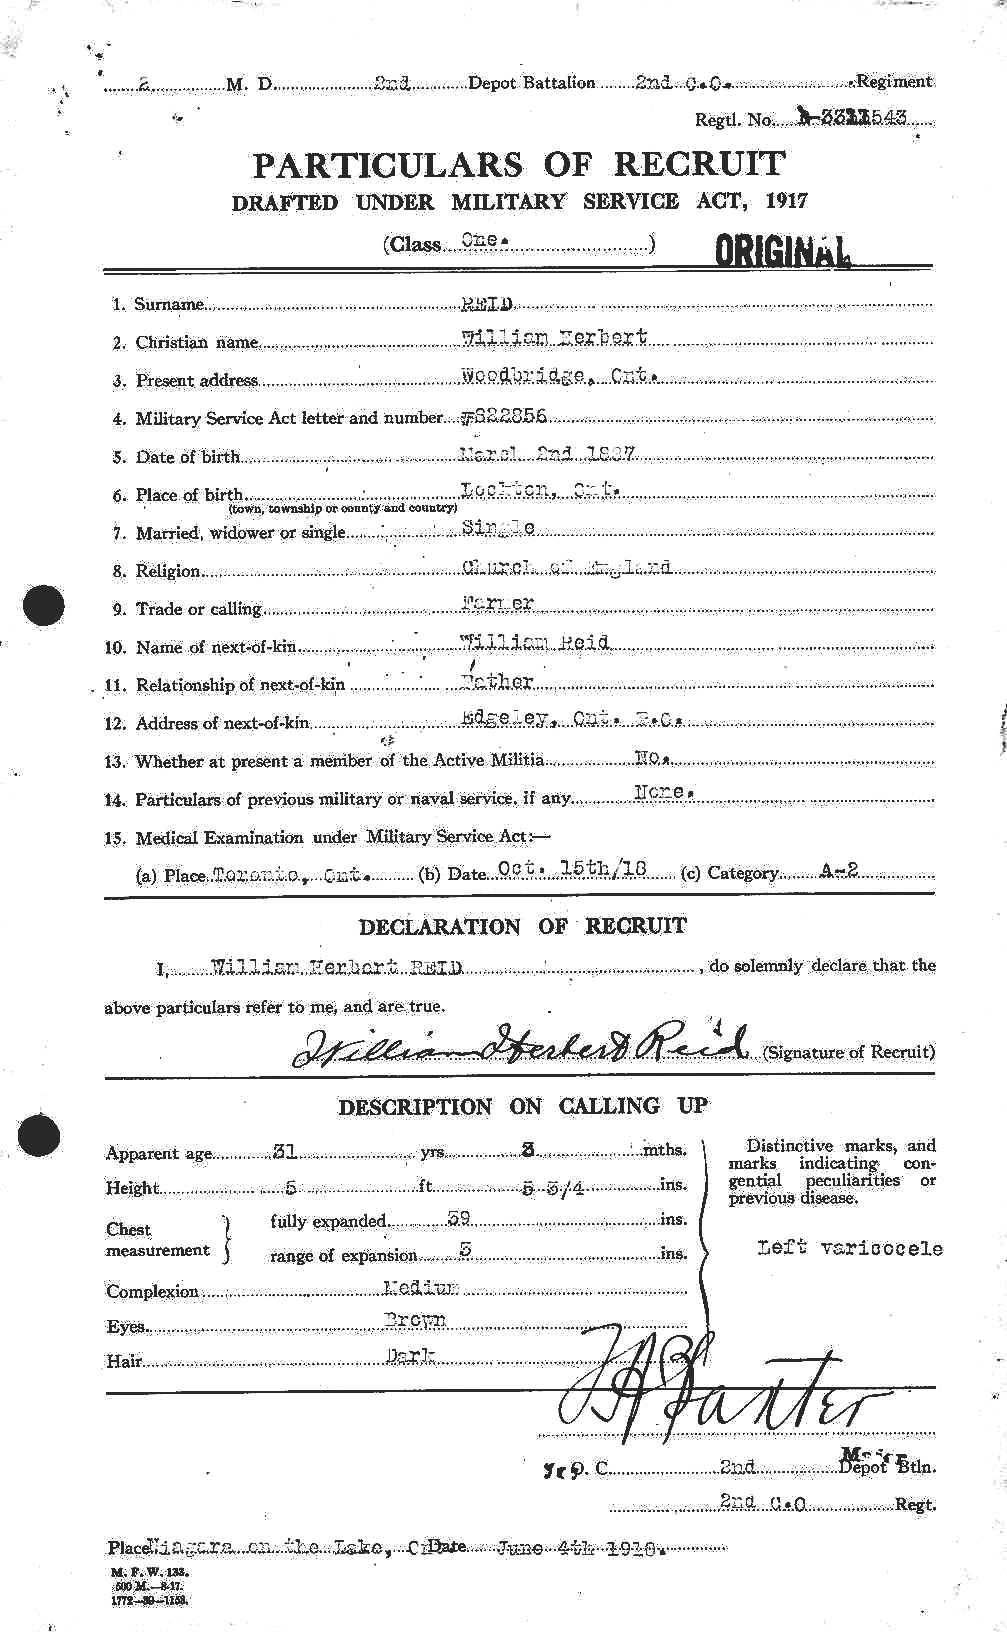 Personnel Records of the First World War - CEF 597001a